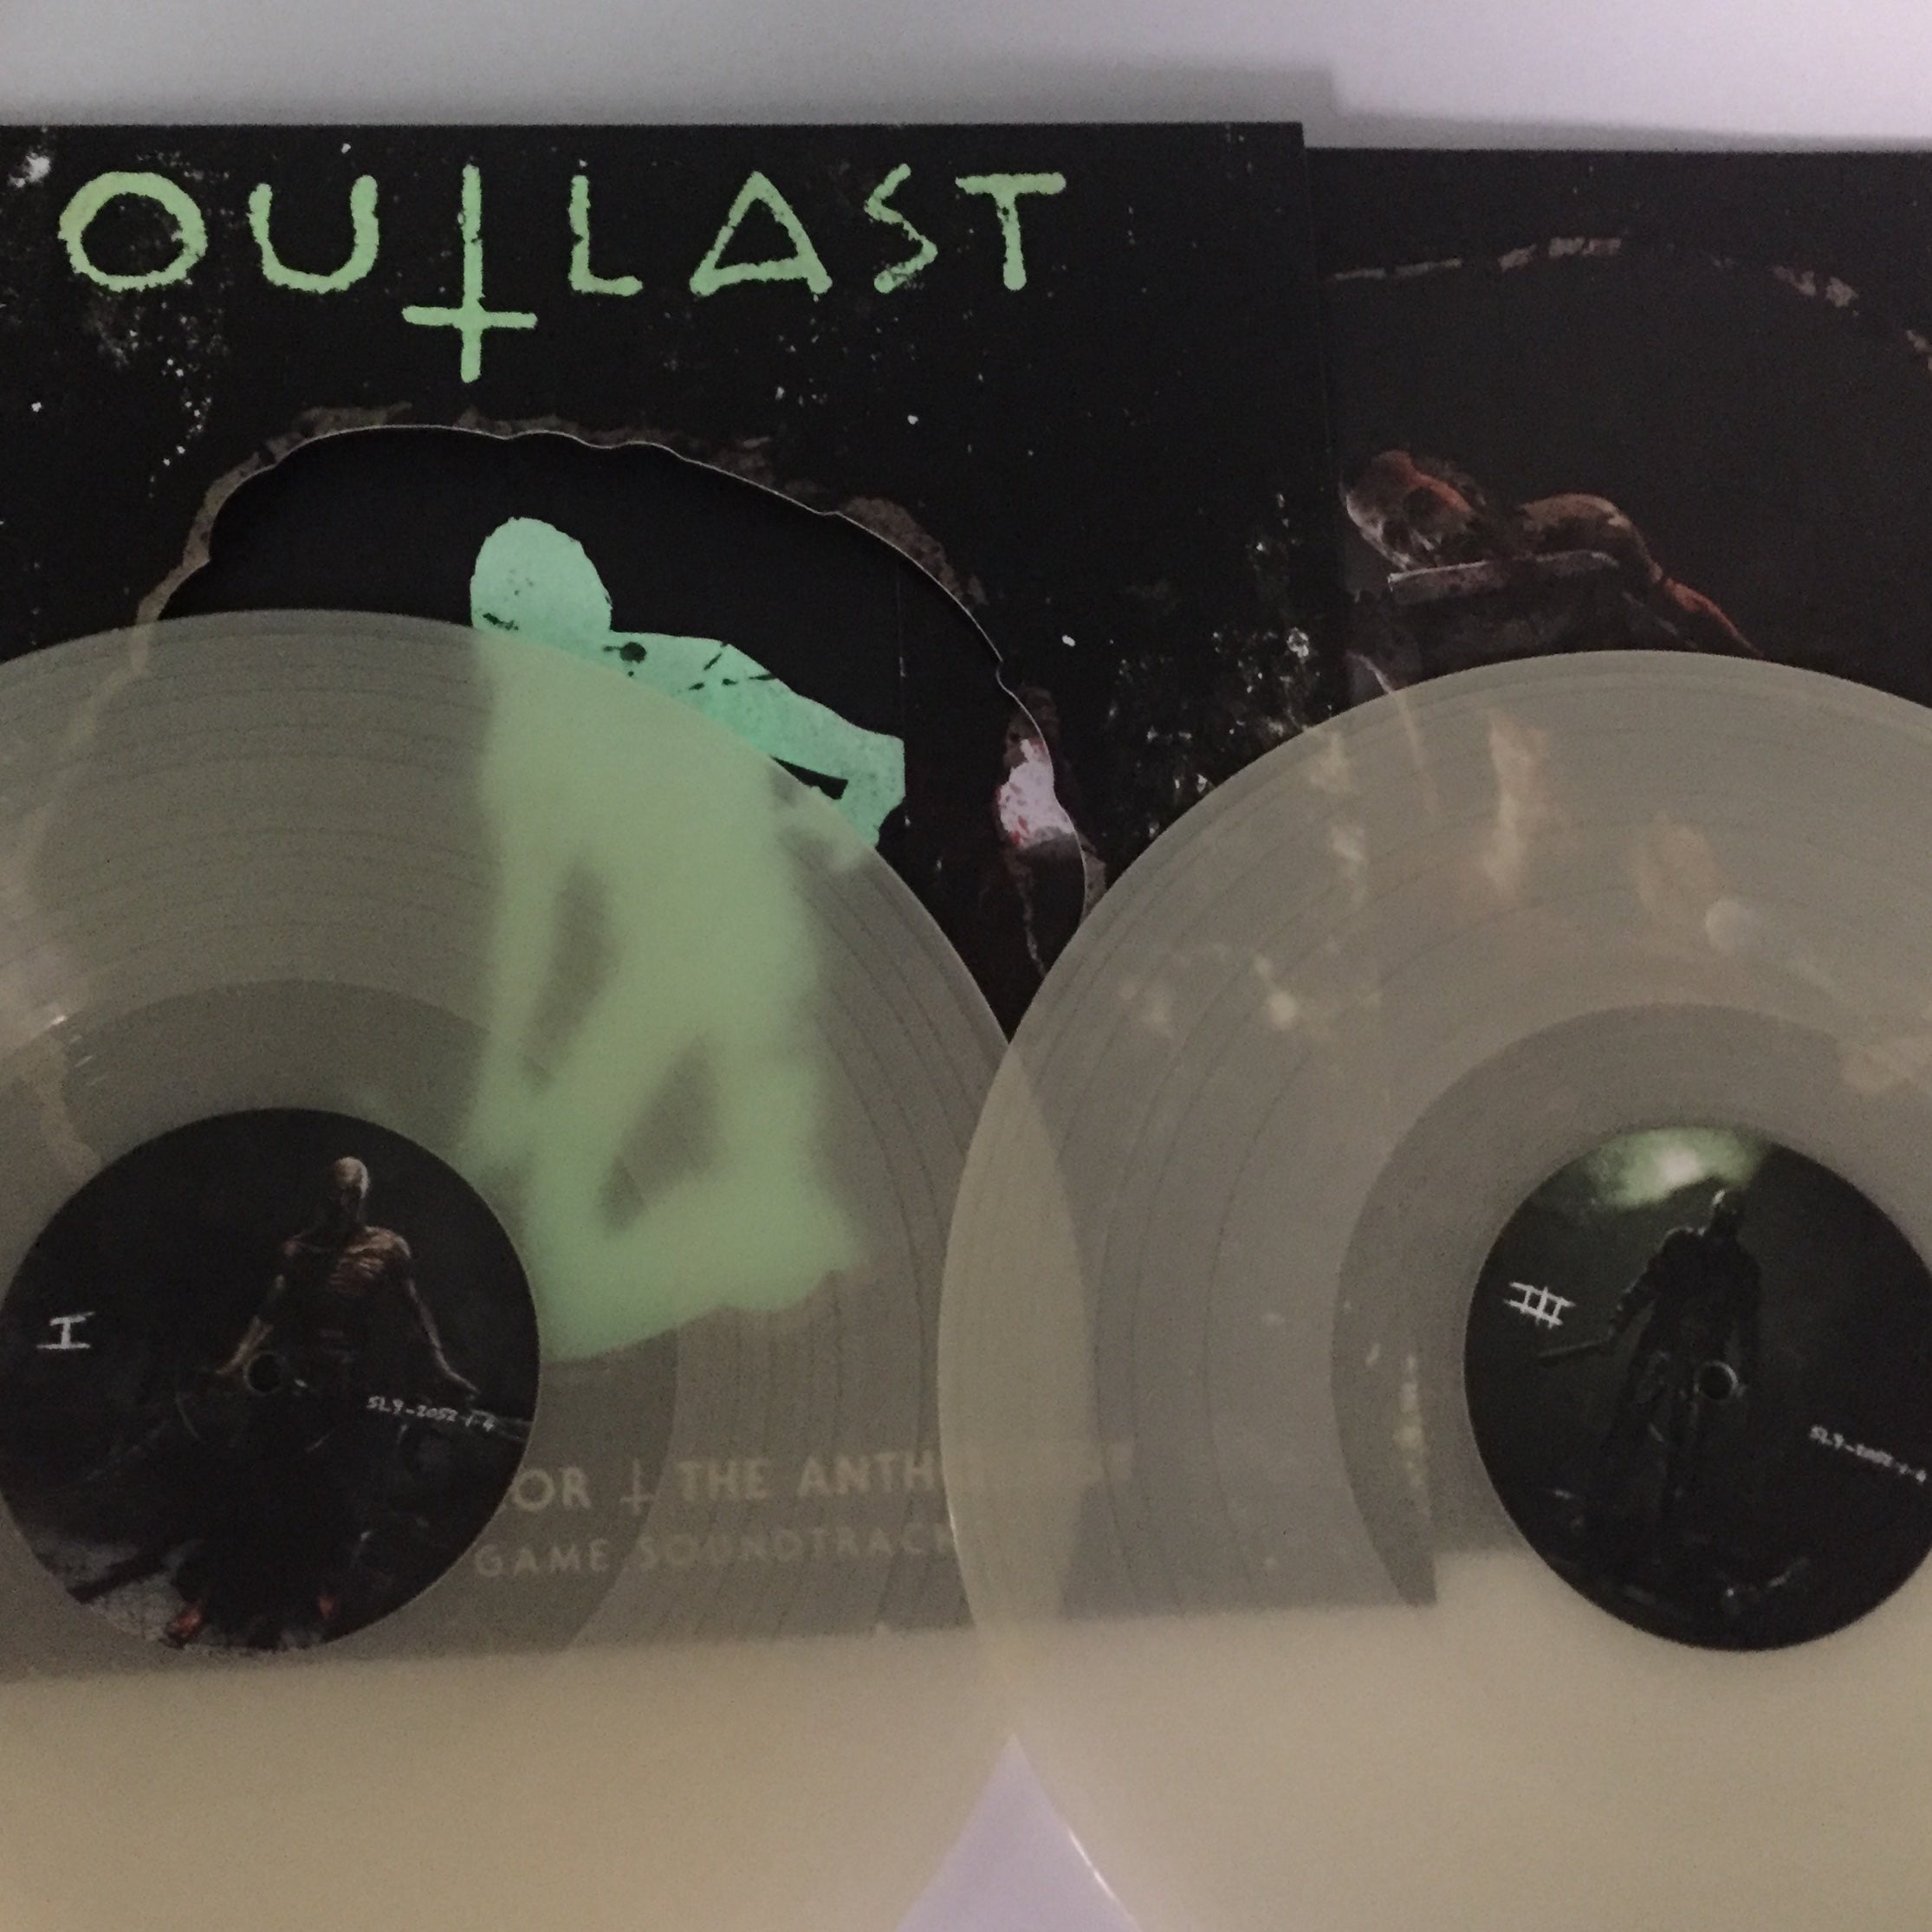 Listen To A Soundtrack Preview For The Outlast Trials Now, Vinyl